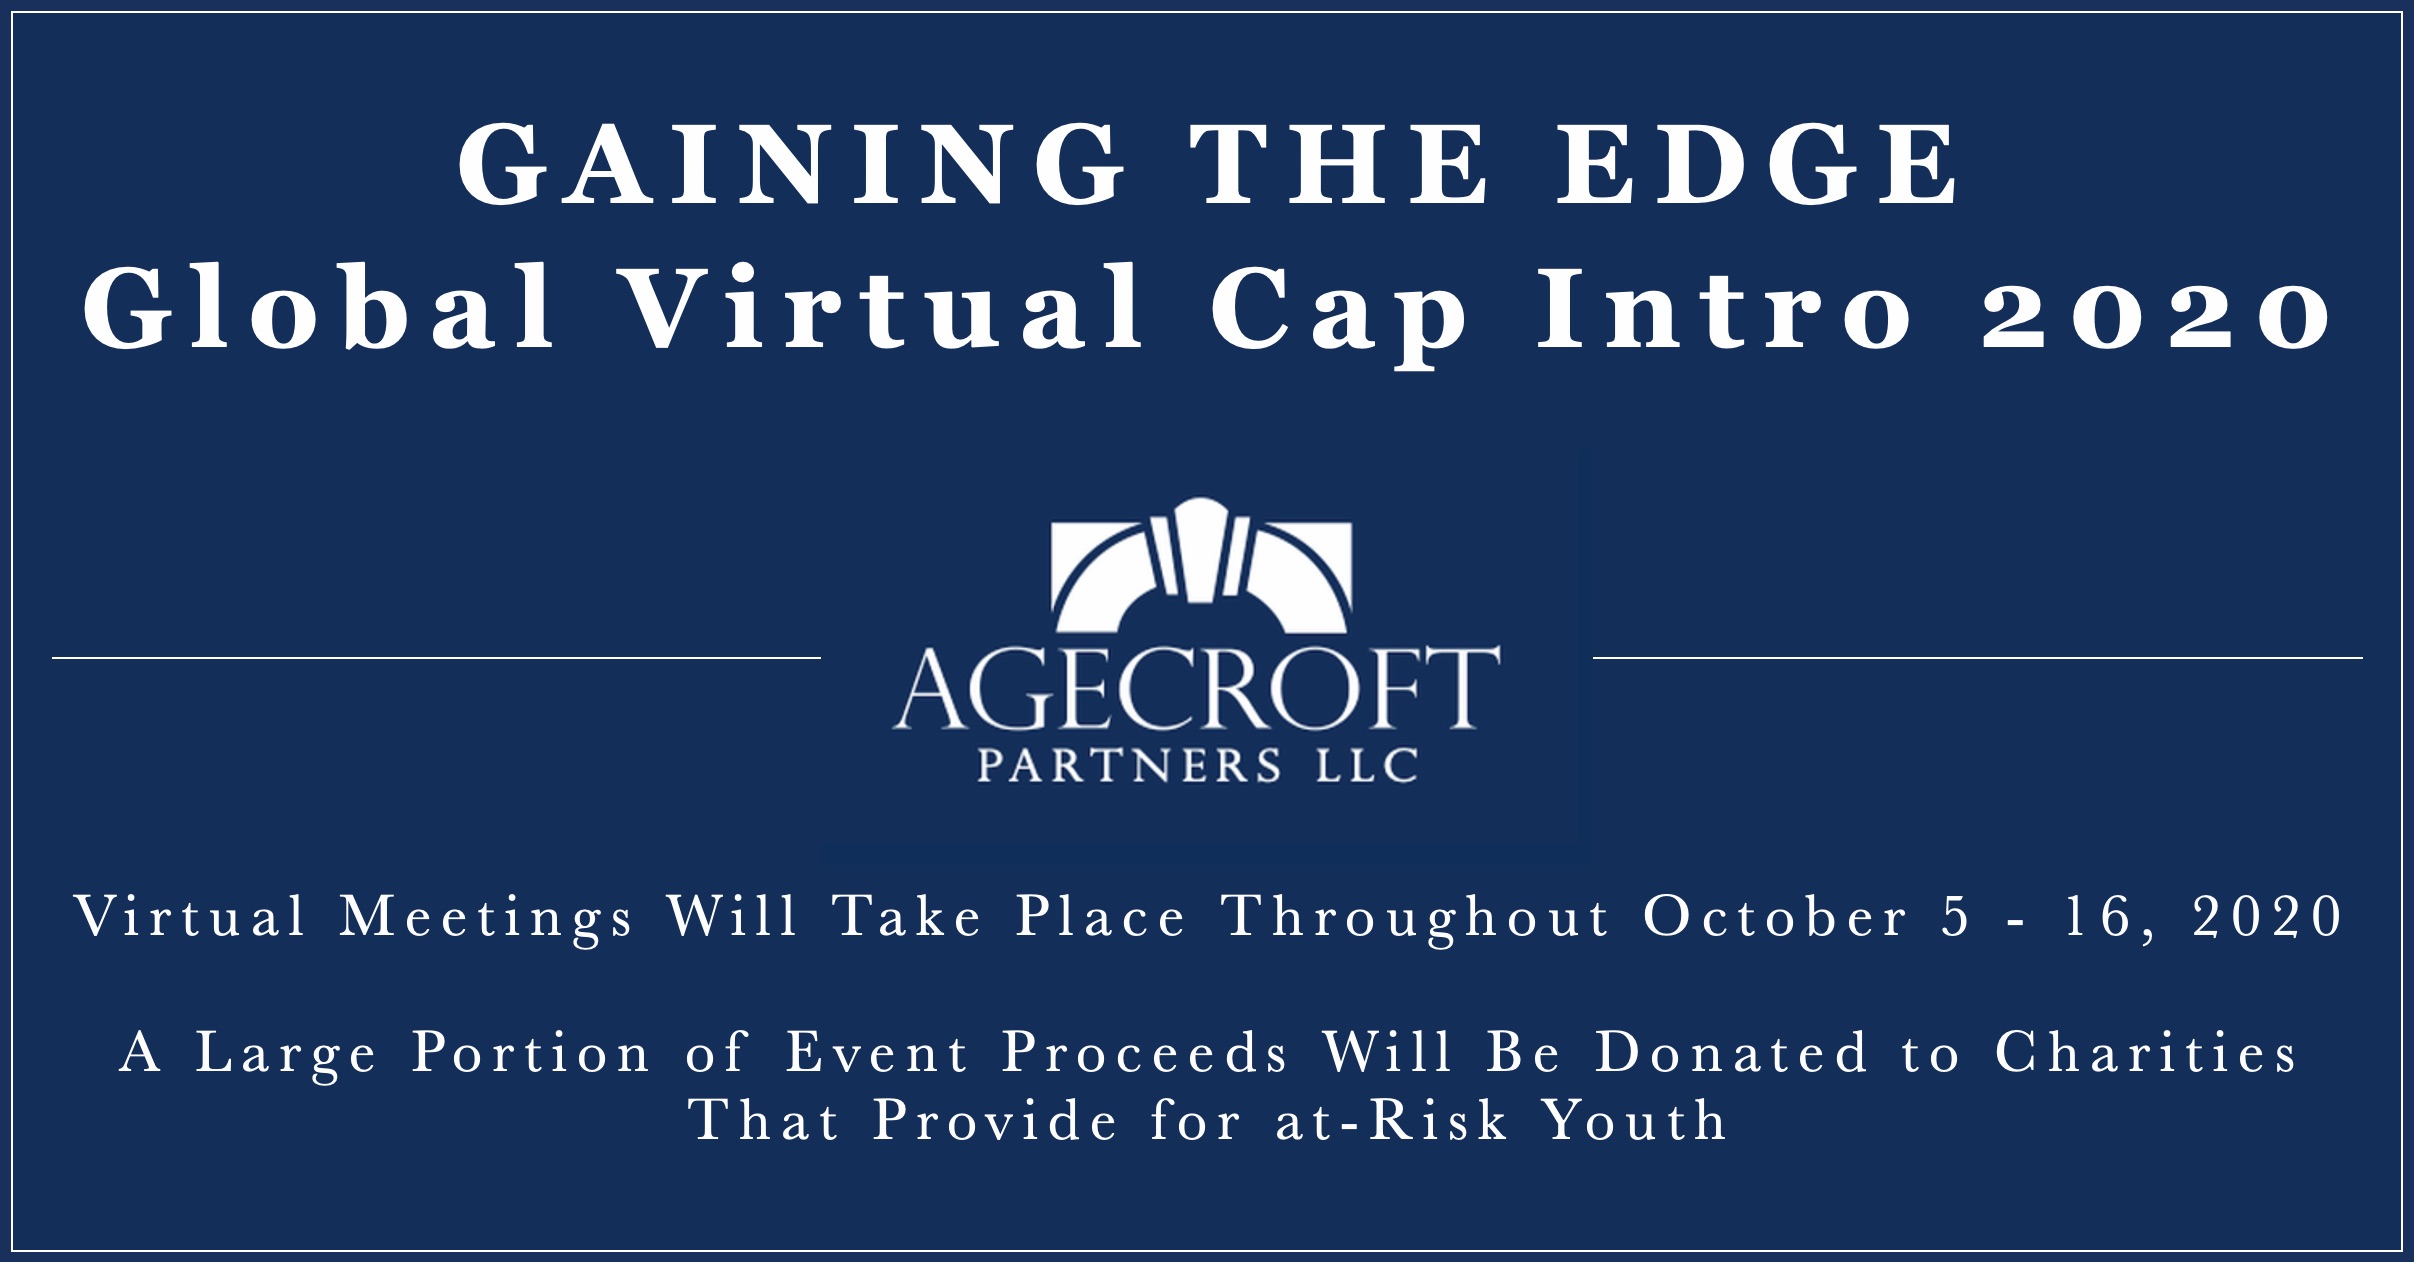 Gaining The Edge - Global Virtual Cap Intro 2020 organized by Agecroft Partners